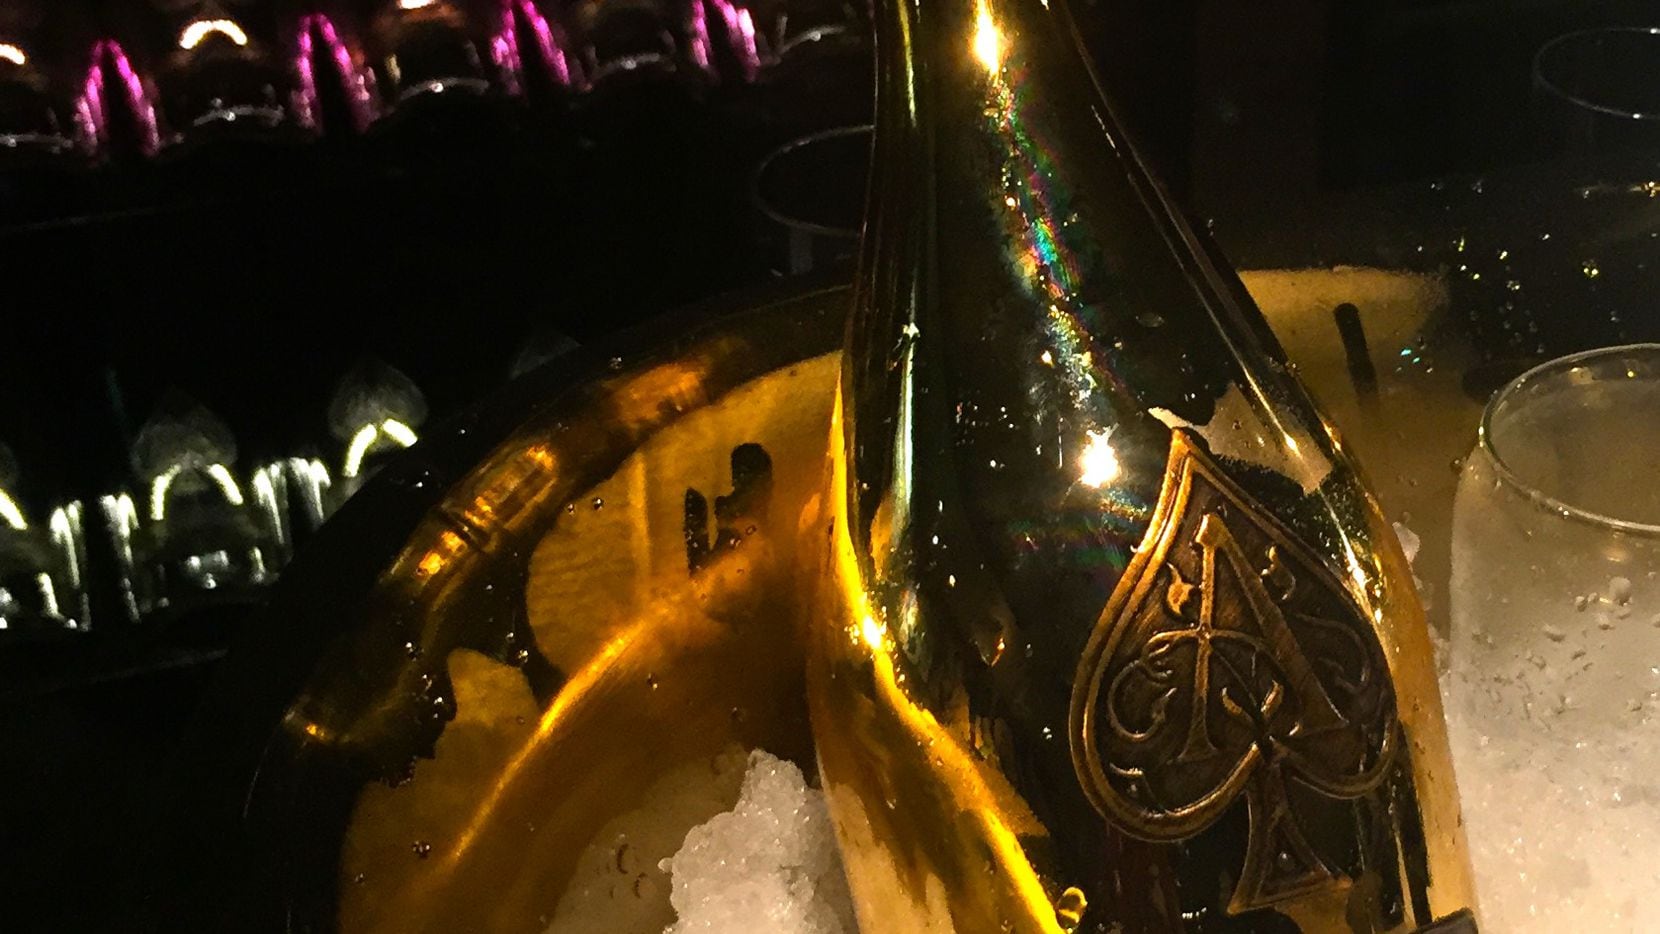 A single glass of Ace of Spades' Brut Champagne will cost $150 at Nick & Sam's Steakhouse....